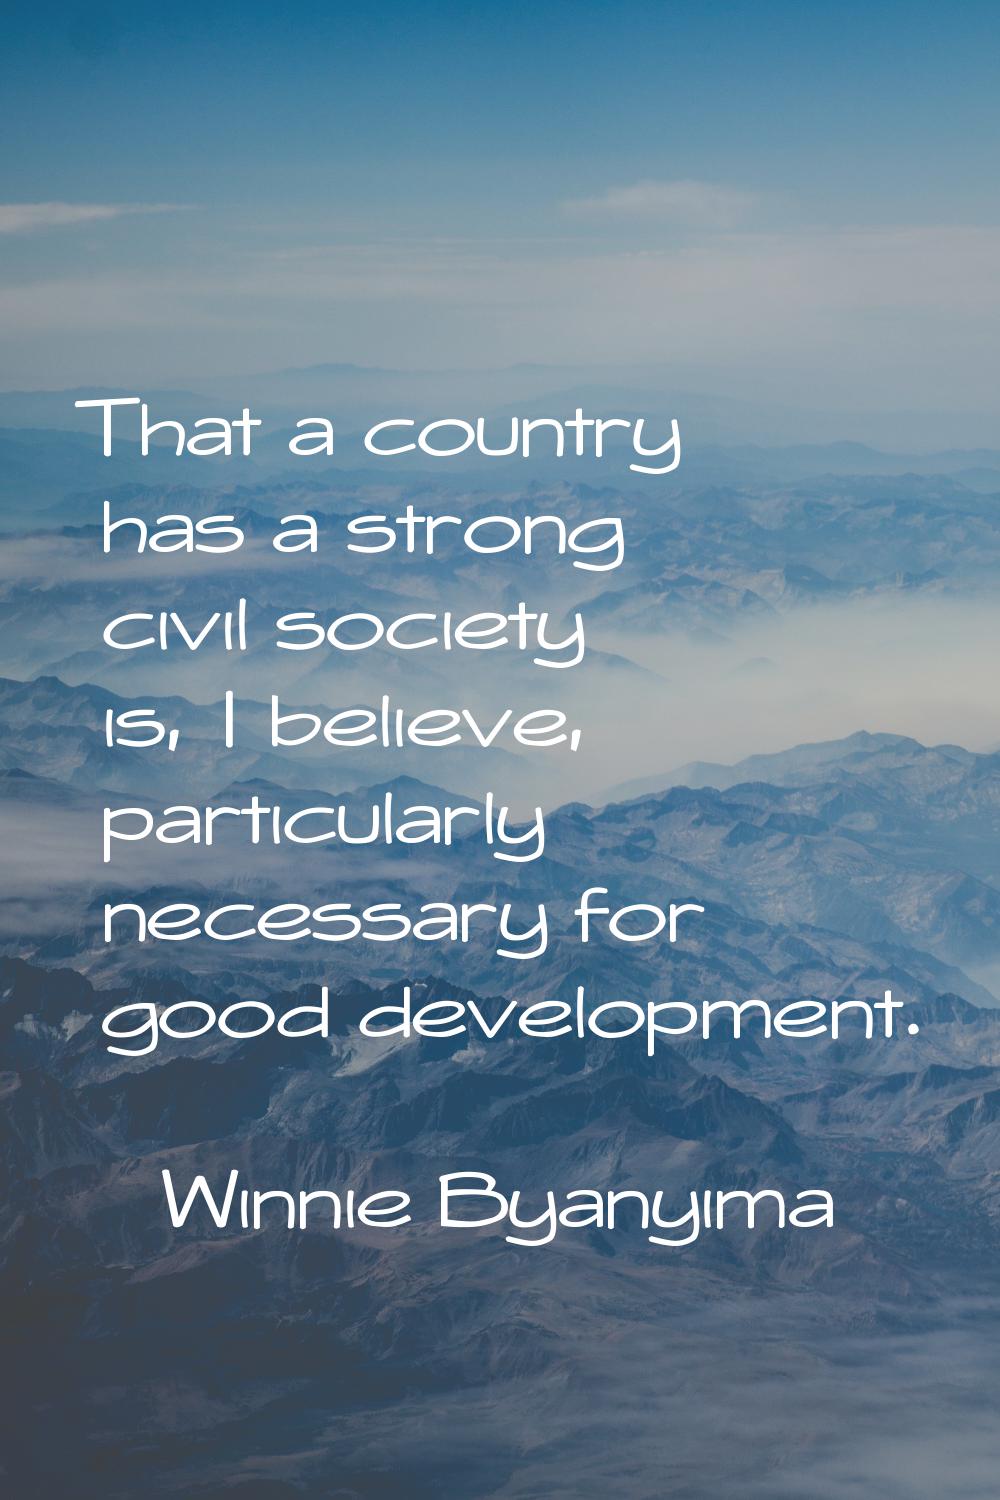 That a country has a strong civil society is, I believe, particularly necessary for good developmen